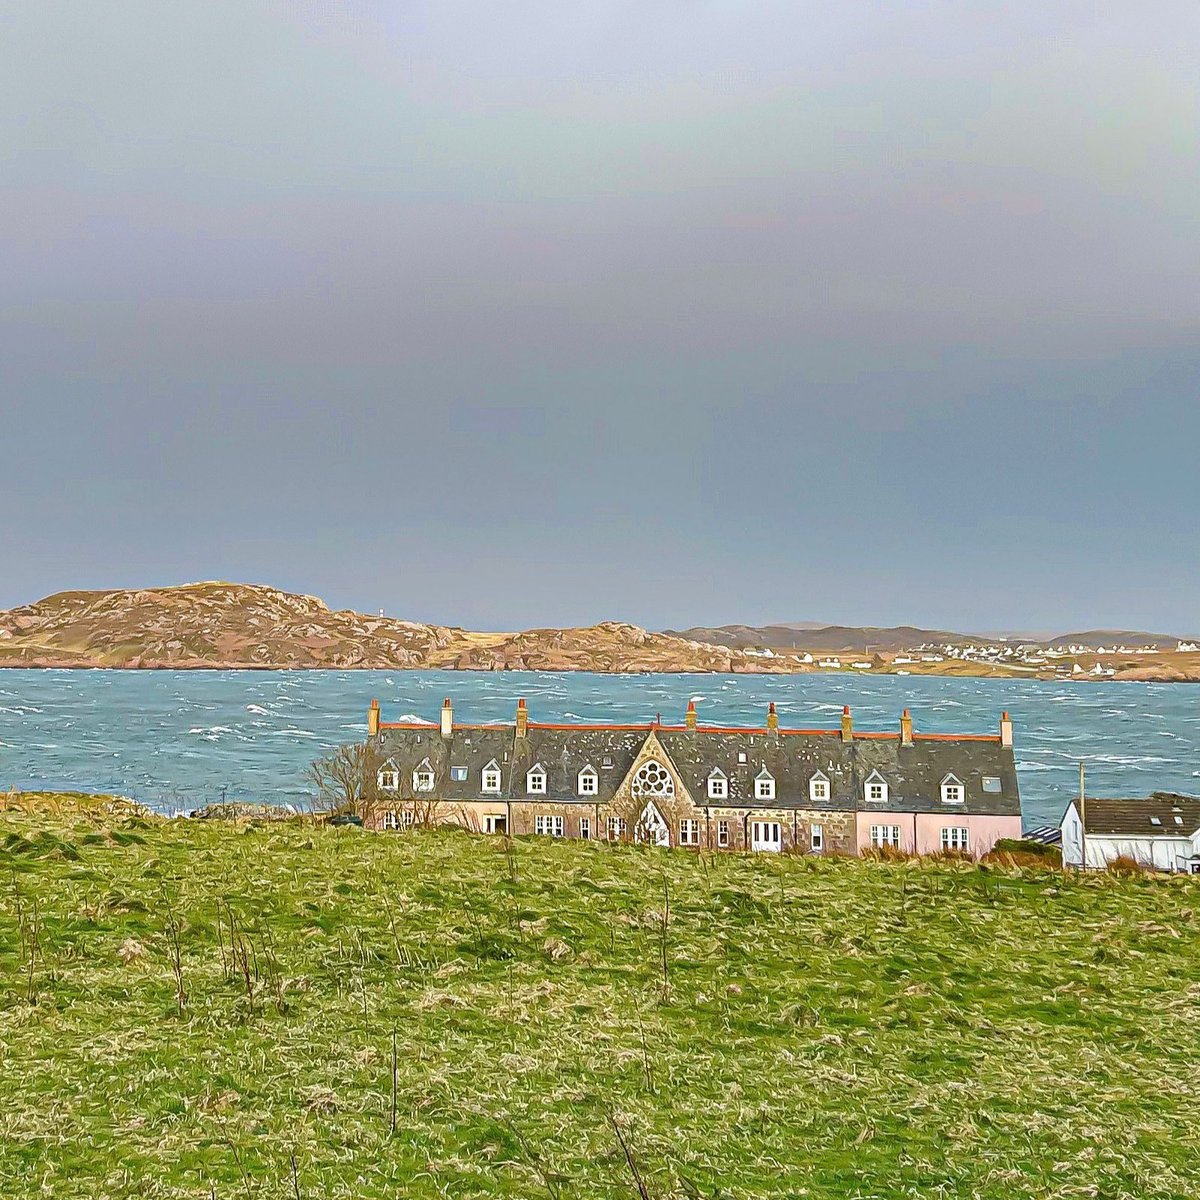 𝐖𝐡𝐚𝐭 𝐚 𝐯𝐢𝐞𝐰 👀

We are so lucky to wake up to this wonderful view every day. Immerse yourself in the breathtaking panoramas of Iona and Mull from our hotel. 🌊

#StColumbaHotel #VisitMullAndIona